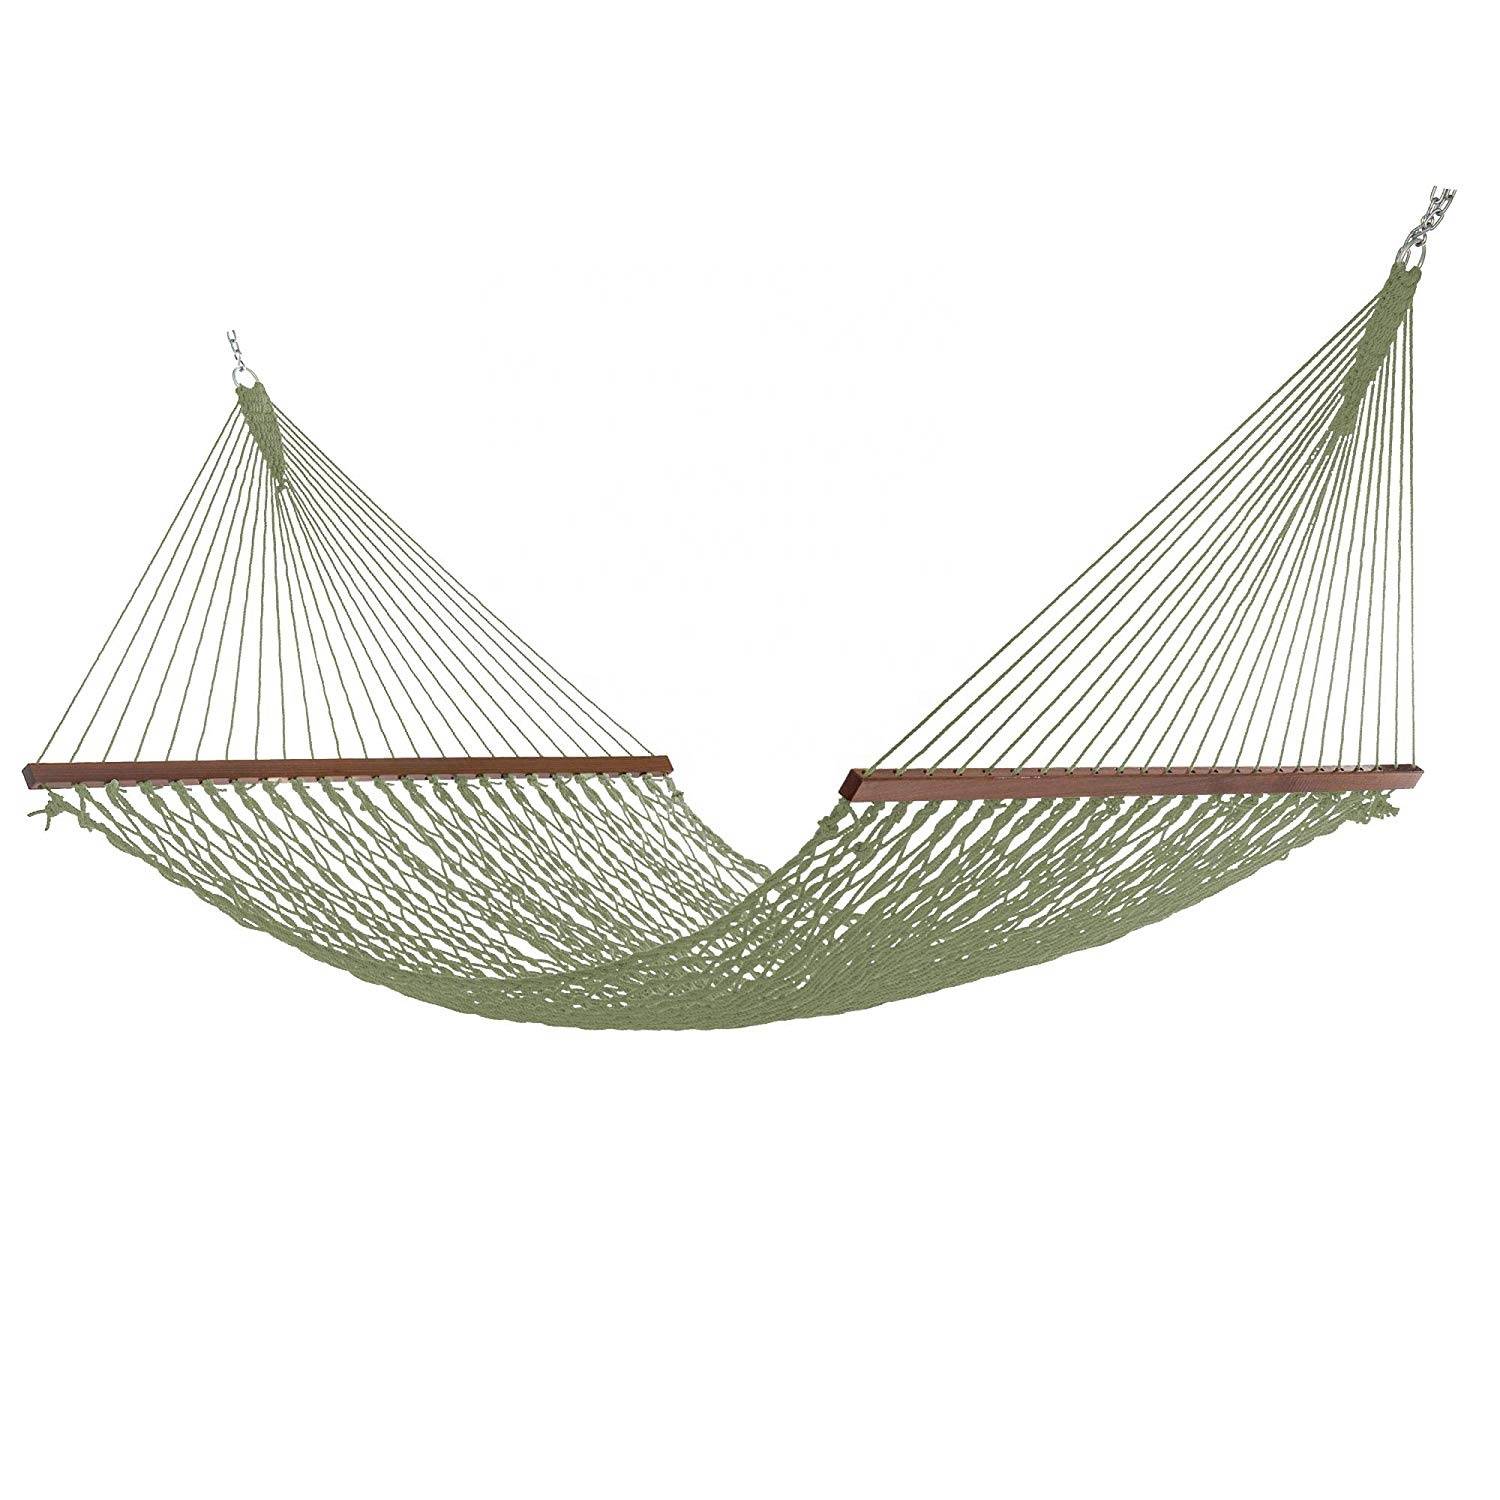 Wholesale Price China Hanging Rope Chair Swing - Caribbean hammock with 2 chains and S hooks Rope swing hammock – Top Asian